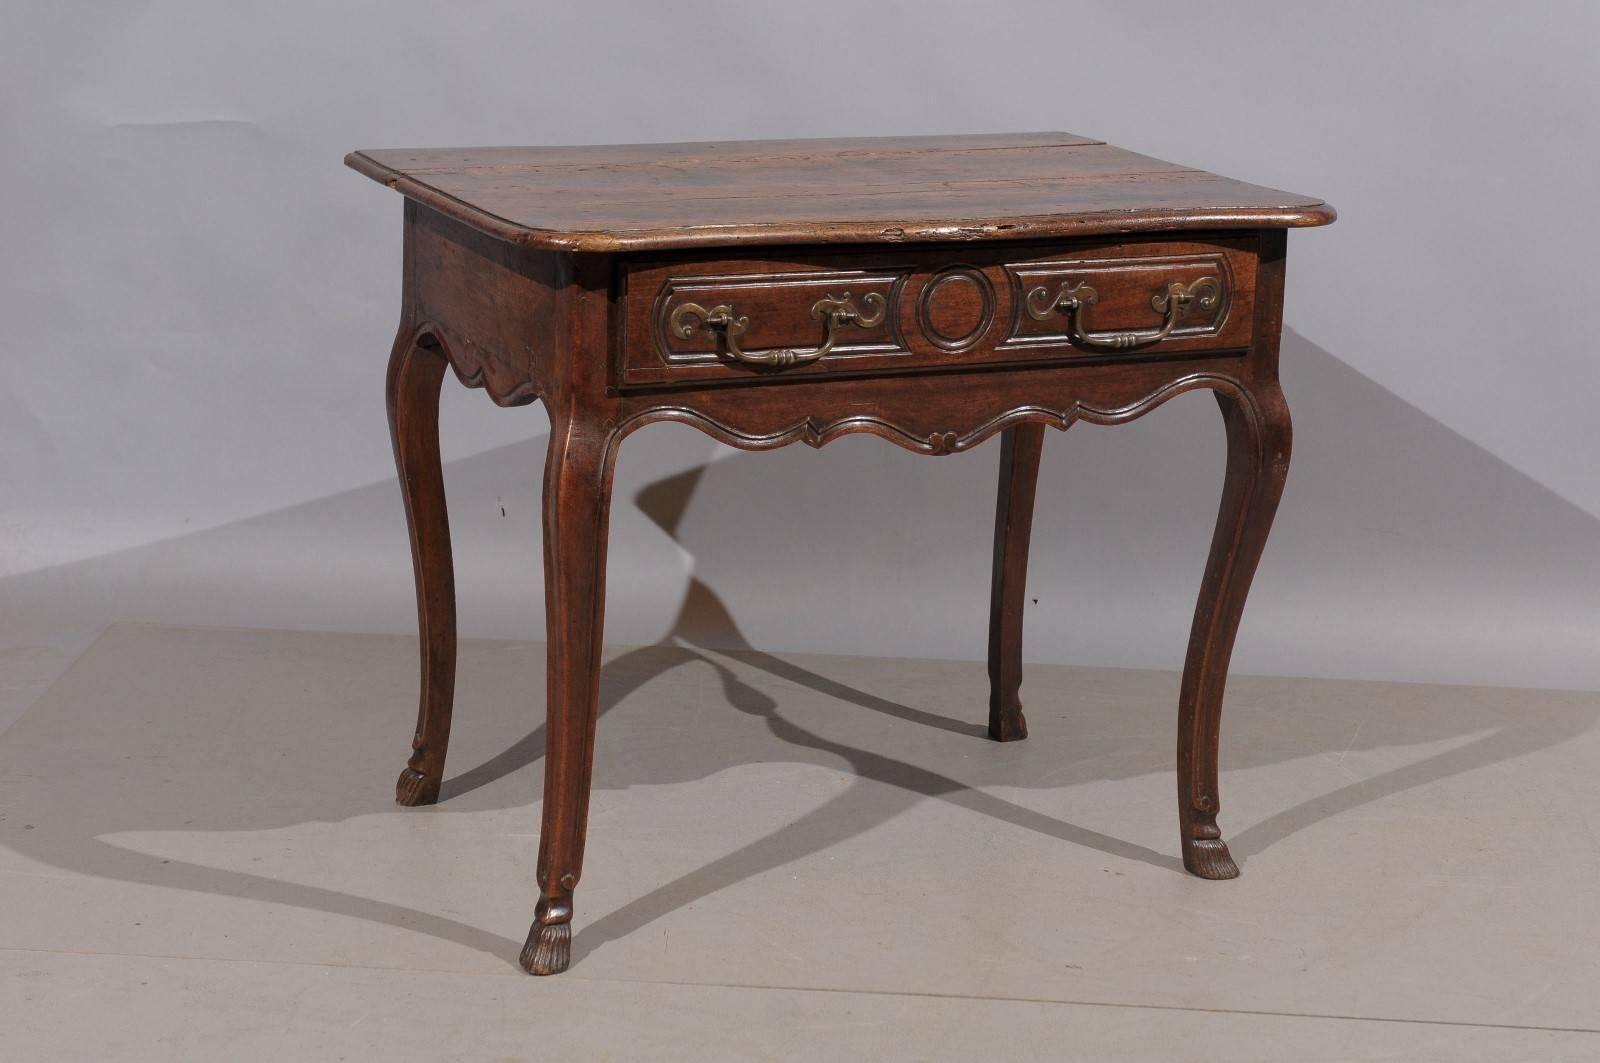 18th century French Louis XV walnut side table with drawer and hoof feet.